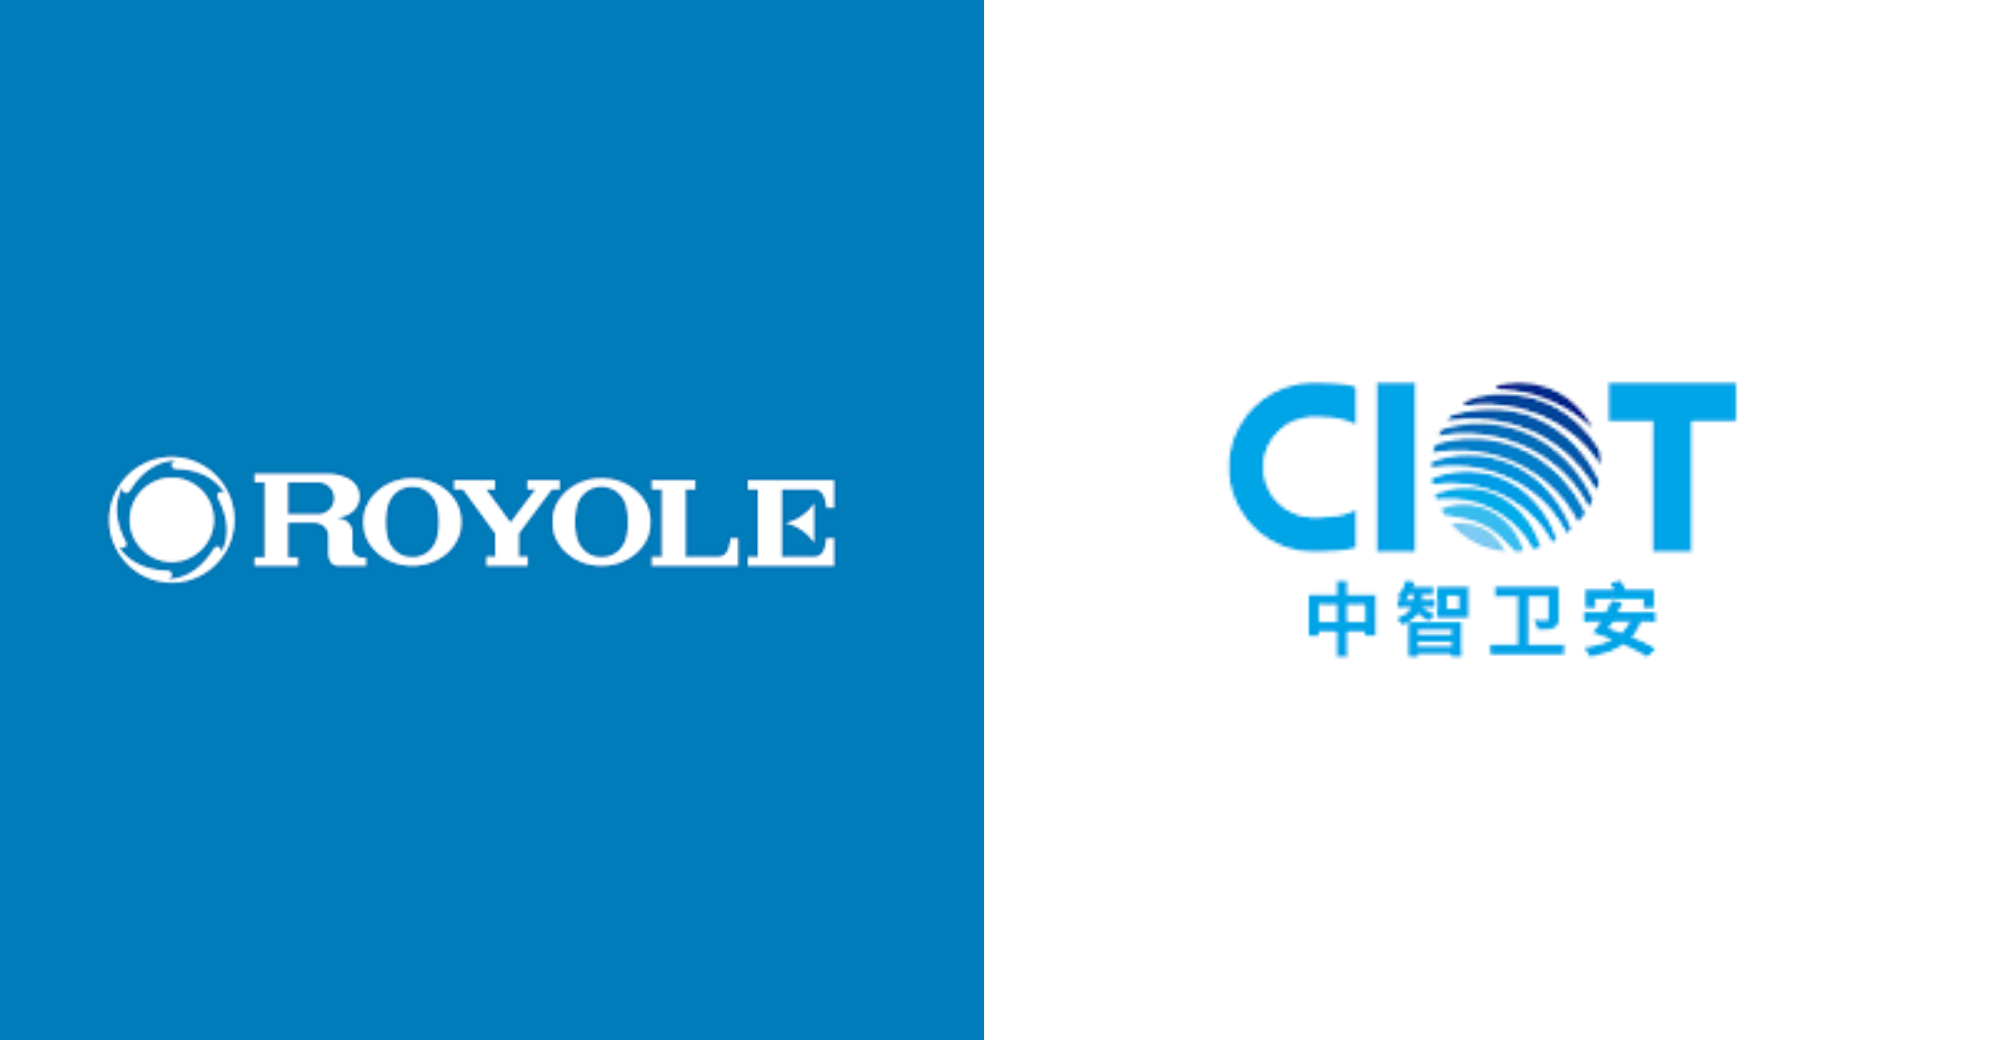 Display Firm Royole Wins 3 Billion Yuan in Product Orders From CIOT